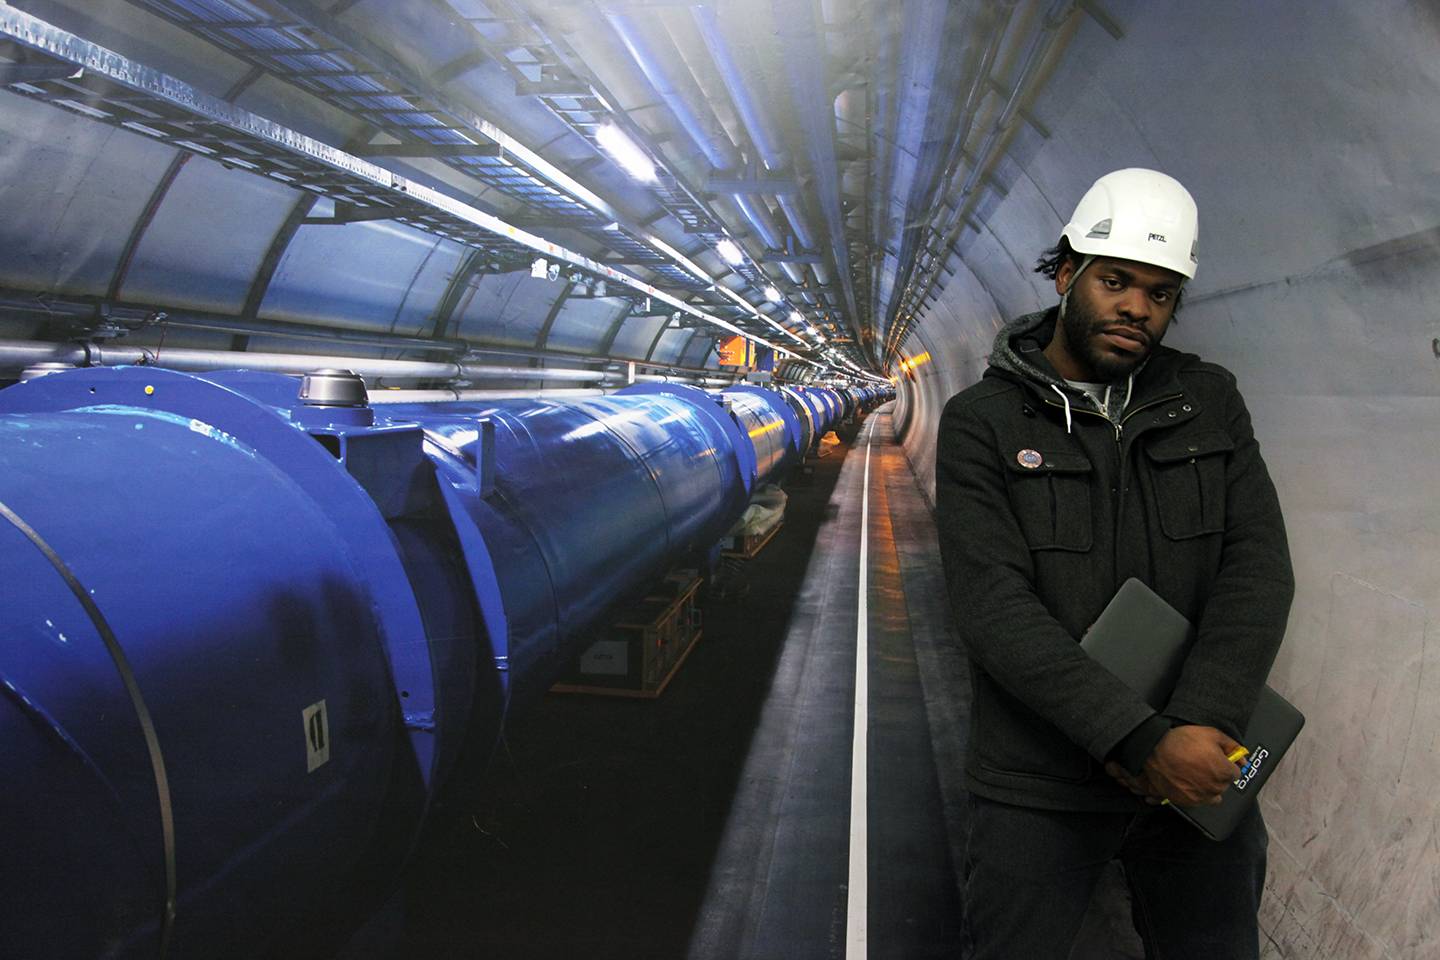 Rapper Consensus beside the Large Hadron Collider